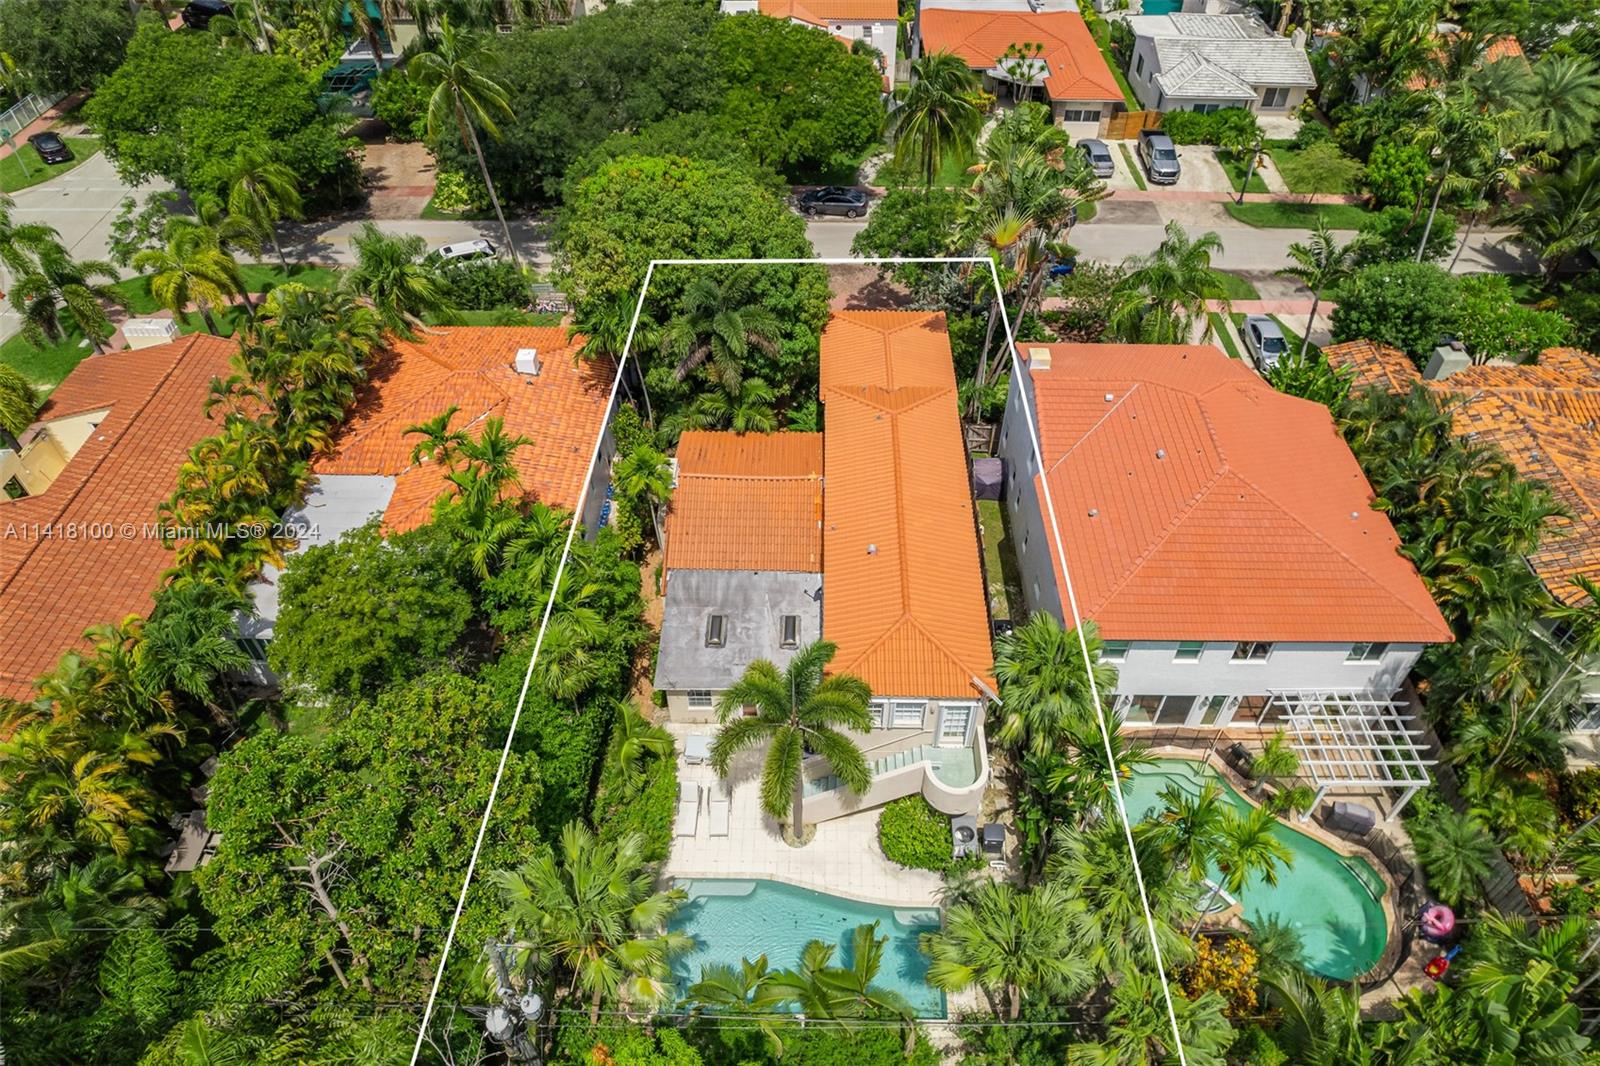 This spacious Miami Beach home with historic charm has 3,305 Sqft. under air. Enter through a tranquil butterfly garden & feel right at peace. This spacious open floor plan with lots of natural light with skylights has four bedrooms and four bathrooms. Vaulted ceilings with exposed original beams centered around a beautiful fireplace in the large formal dining room. Remodeled eat in kitchen with island. The private owners suite with renovated ensuite has an attached bonus room area with a private entrance. Ample closet and storage space. Entertain in this private backyard oasis with a newly resurfaced pool. Multiple zone, energy efficient A/C systems. Never lose power. Full home natural gas generator. Tesla charging station. Minutes to all that Miami Beach has to offer.